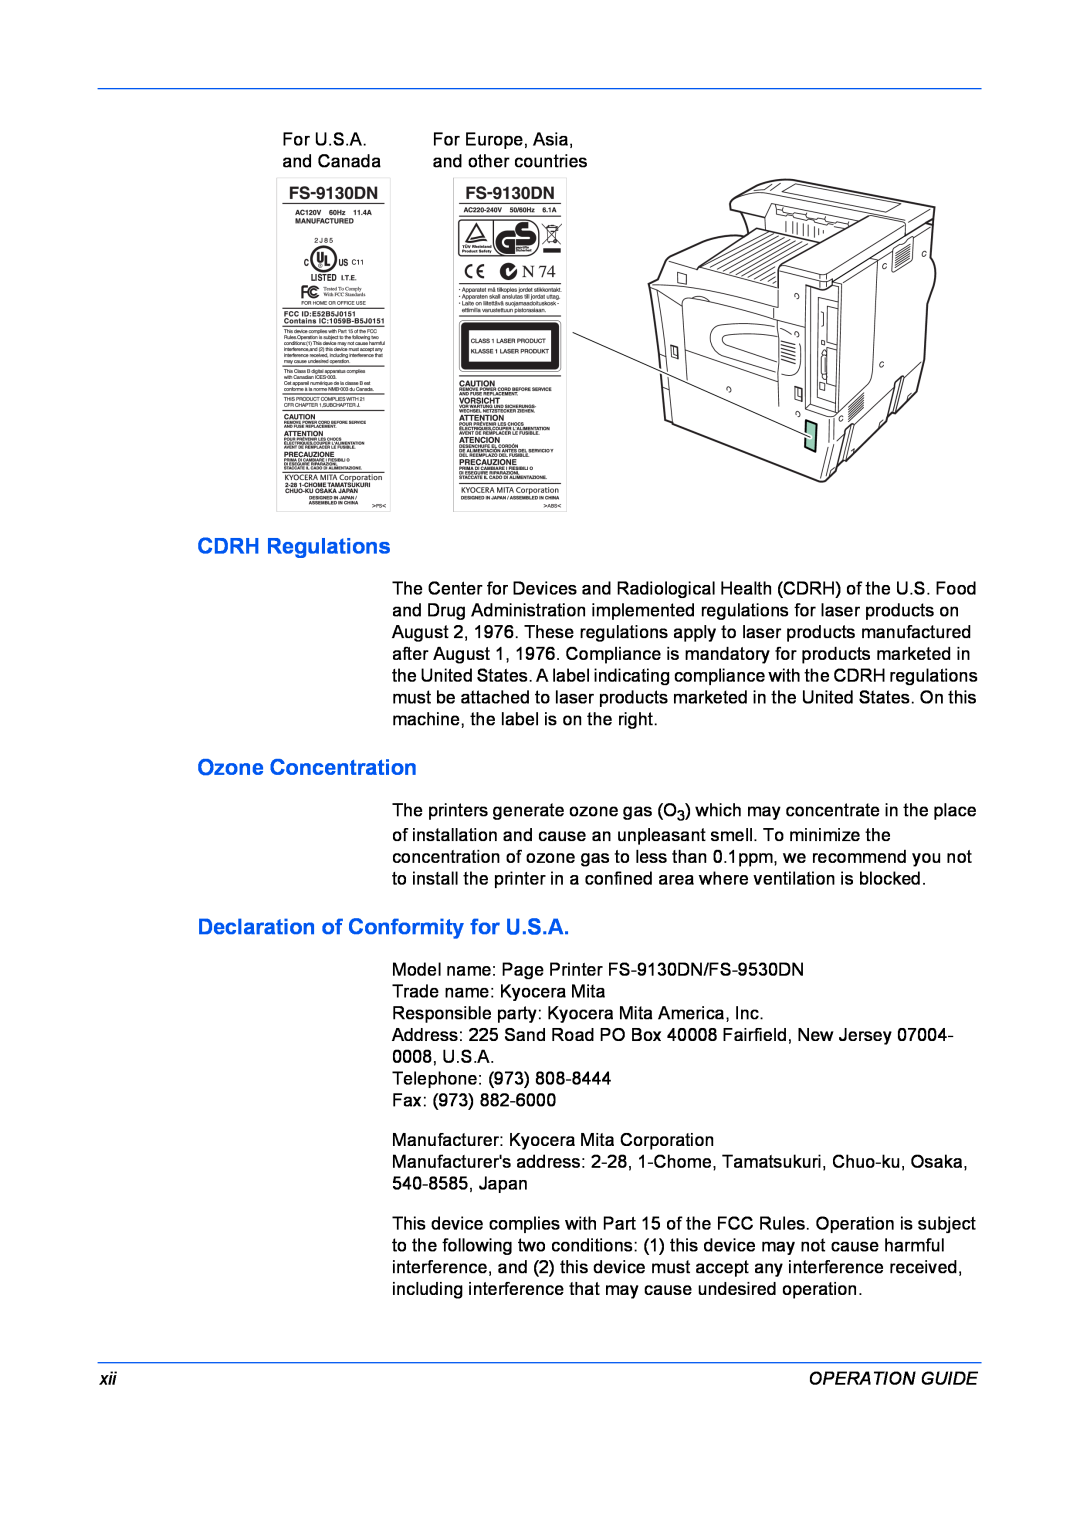 Kyocera FS-9530DN, FS-9130DN CDRH Regulations, Ozone Concentration, Declaration of Conformity for U.S.A, Operation Guide 